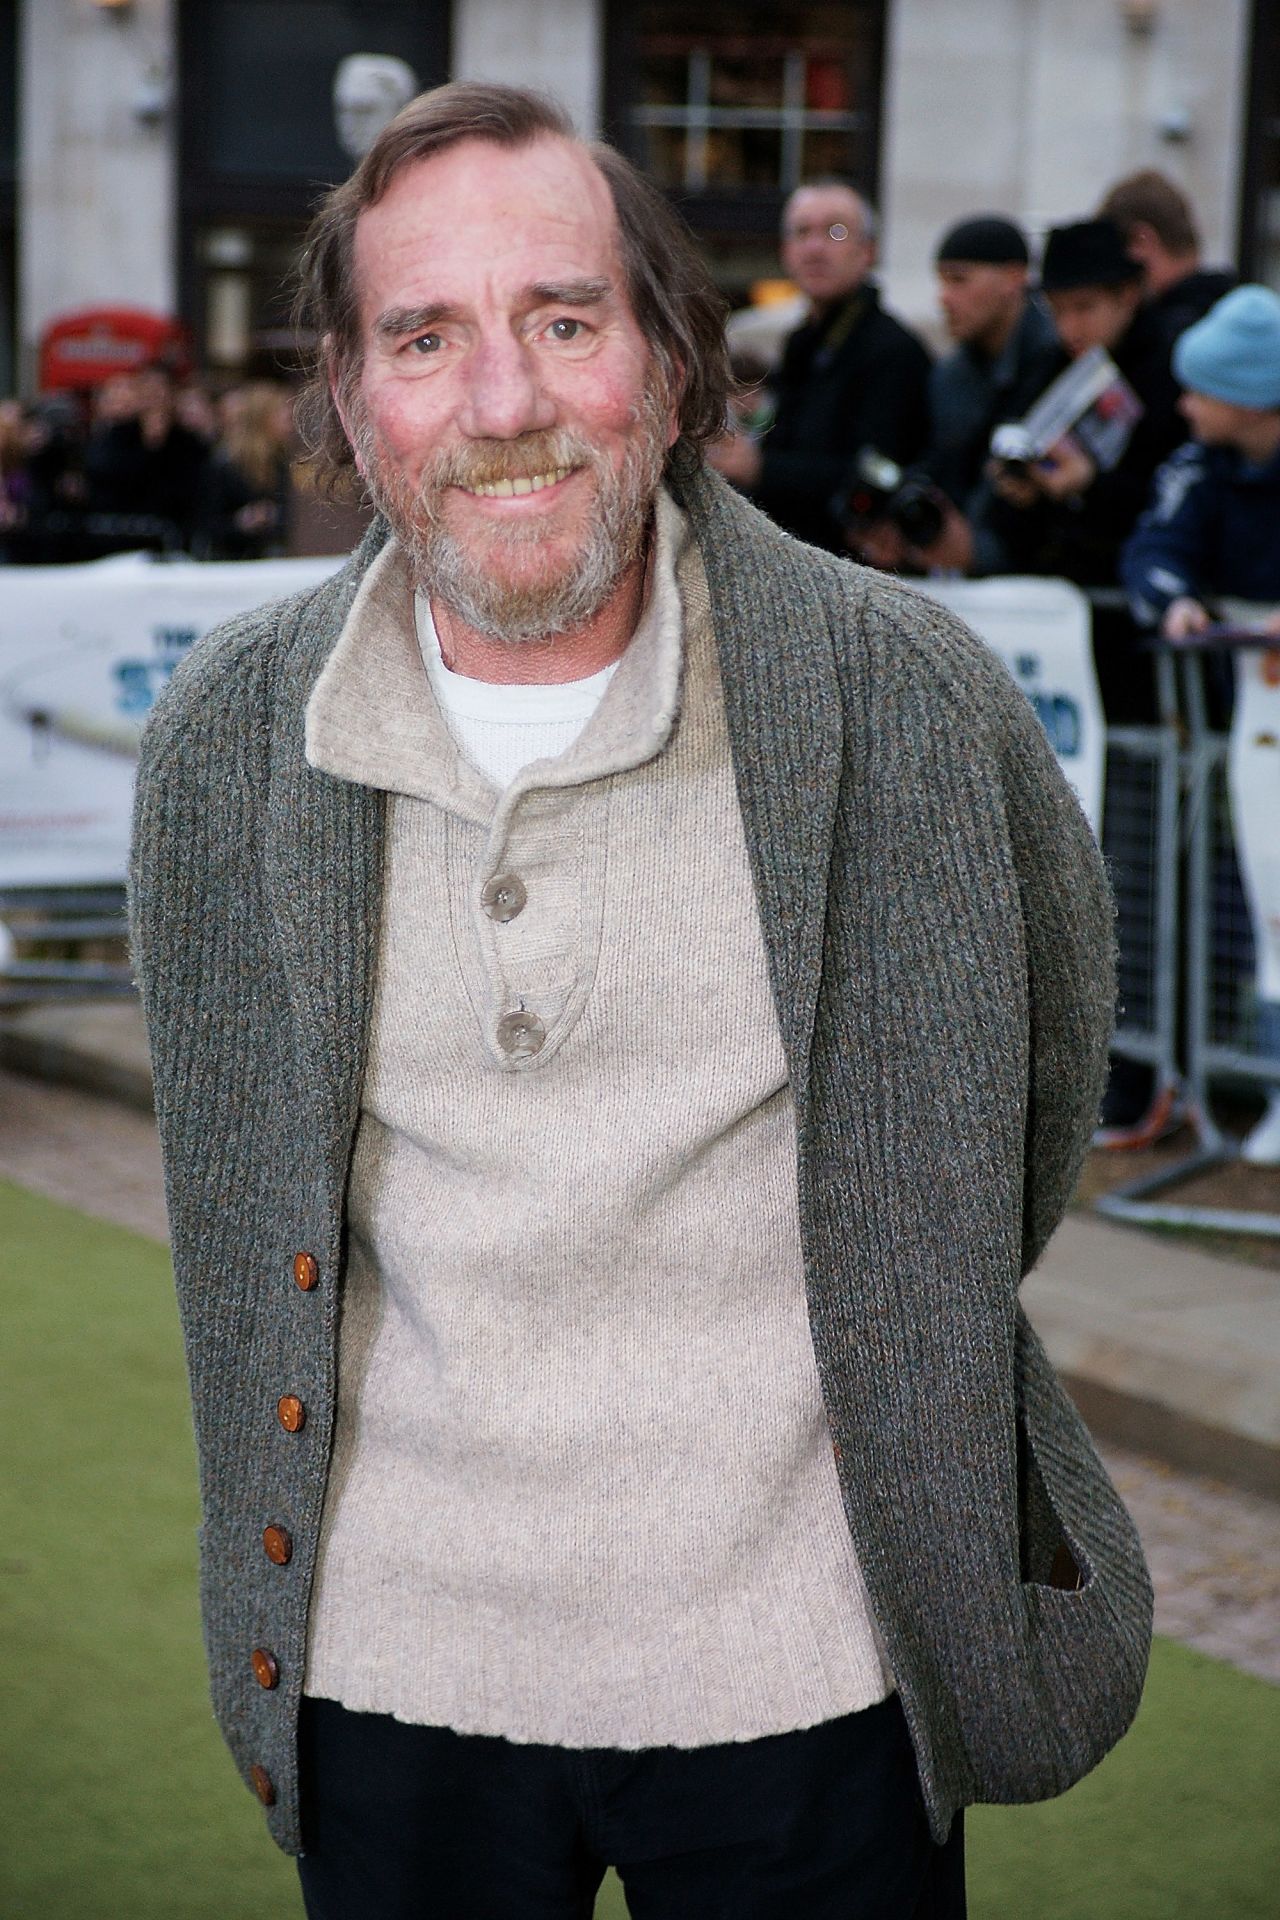 British actor Peter Postlethwaite died of cancer January 3. The Oscar nominee starred in "Inception," "Romeo + Juliet" and the second "Jurassic Park." Steven Spielberg reportedly called him the "best actor in the world." He was 64.<a href="http://articles.cnn.com/2011-01-03/entertainment/obit.pete.postlethwaite_1_brassed-everyman-theatre-british-empire?_s=PM:SHOWBIZ"> Full story</a>